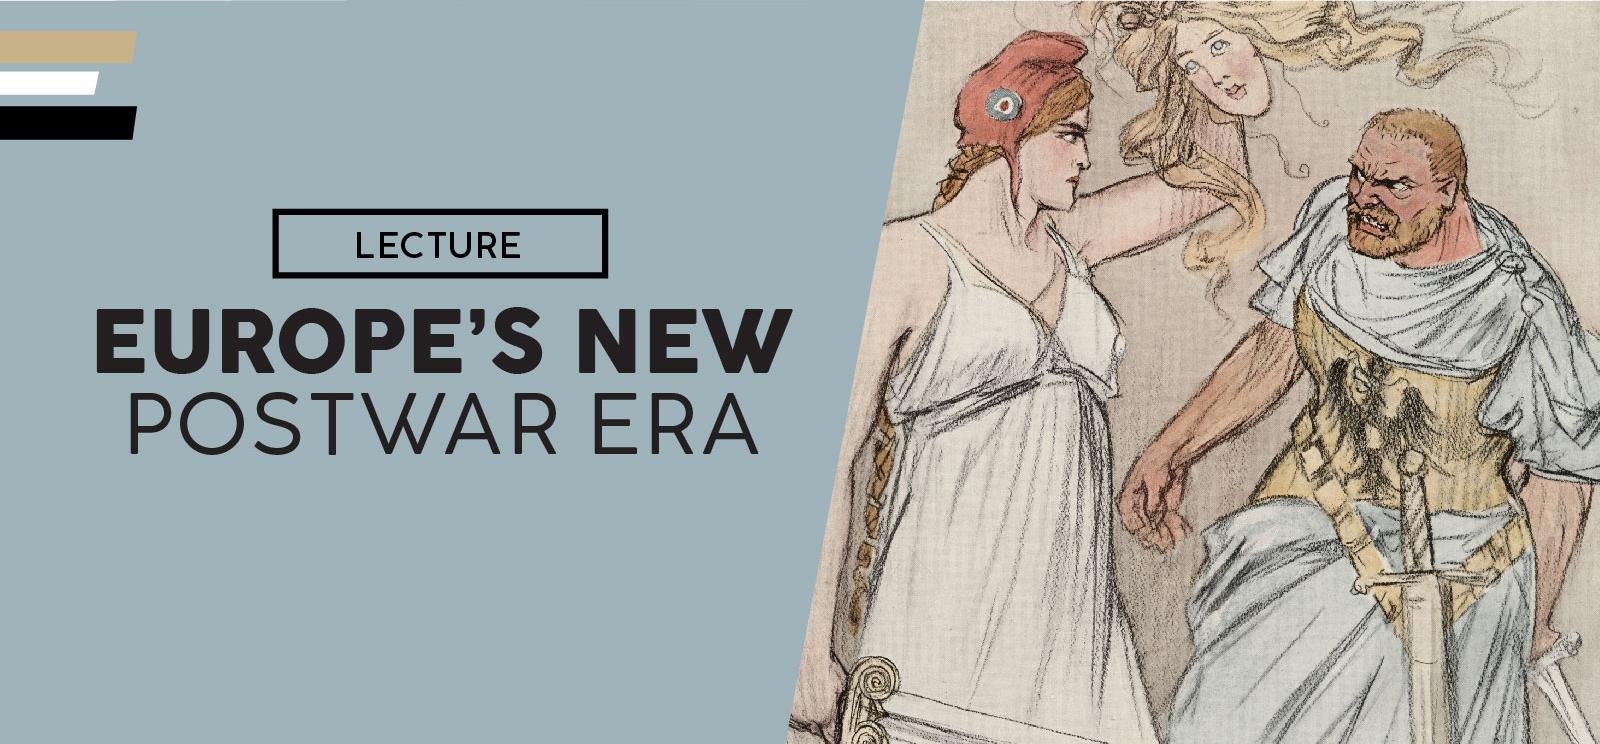 Background image: A female figure in a toga raises a severed head angrily against a male figure in a toga. Text: Lecture / Europe's New Postwar Era